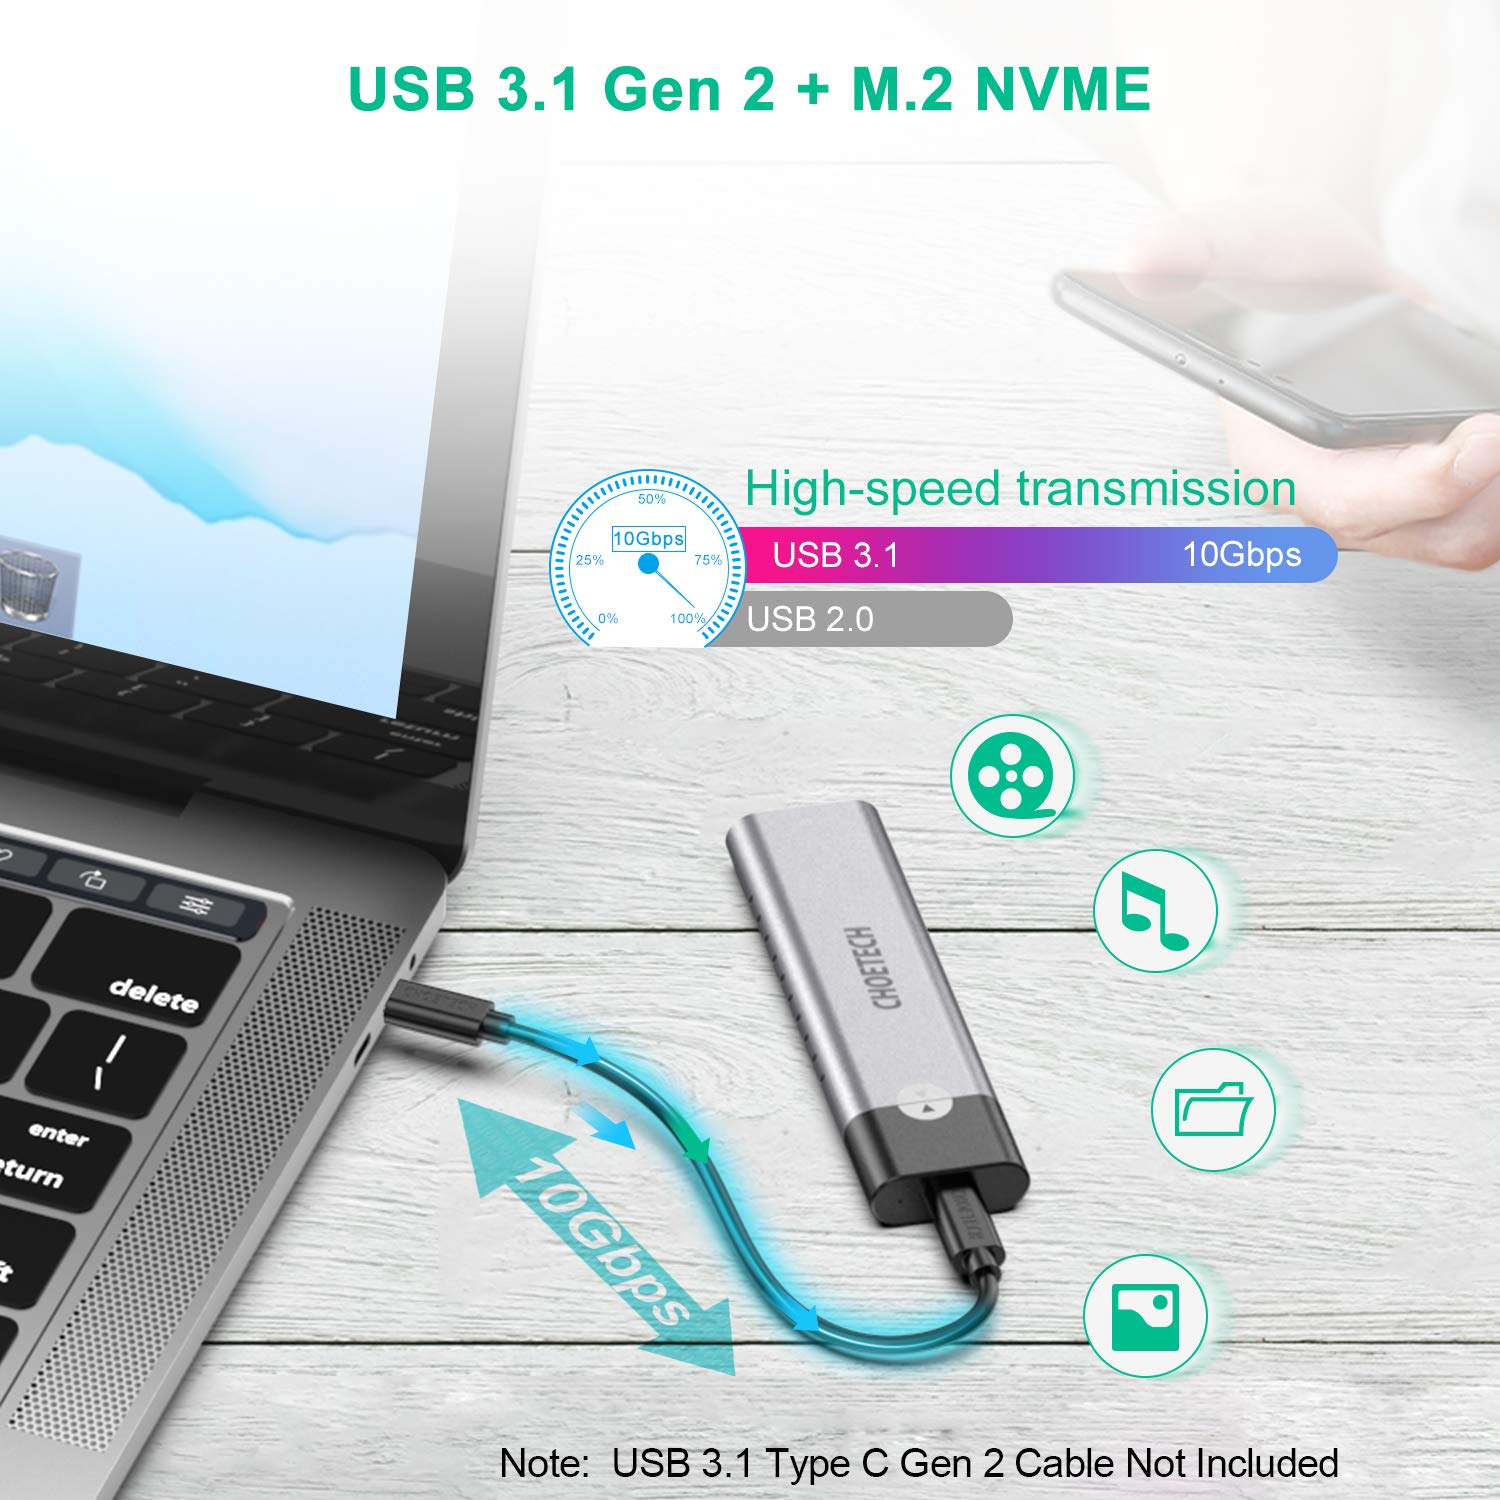 PC-HDE03 New Generation NVMe PCIe M.2 SSD to USB 3.1 Type C Gen 2 Adapter and Enclosure CHOETECH